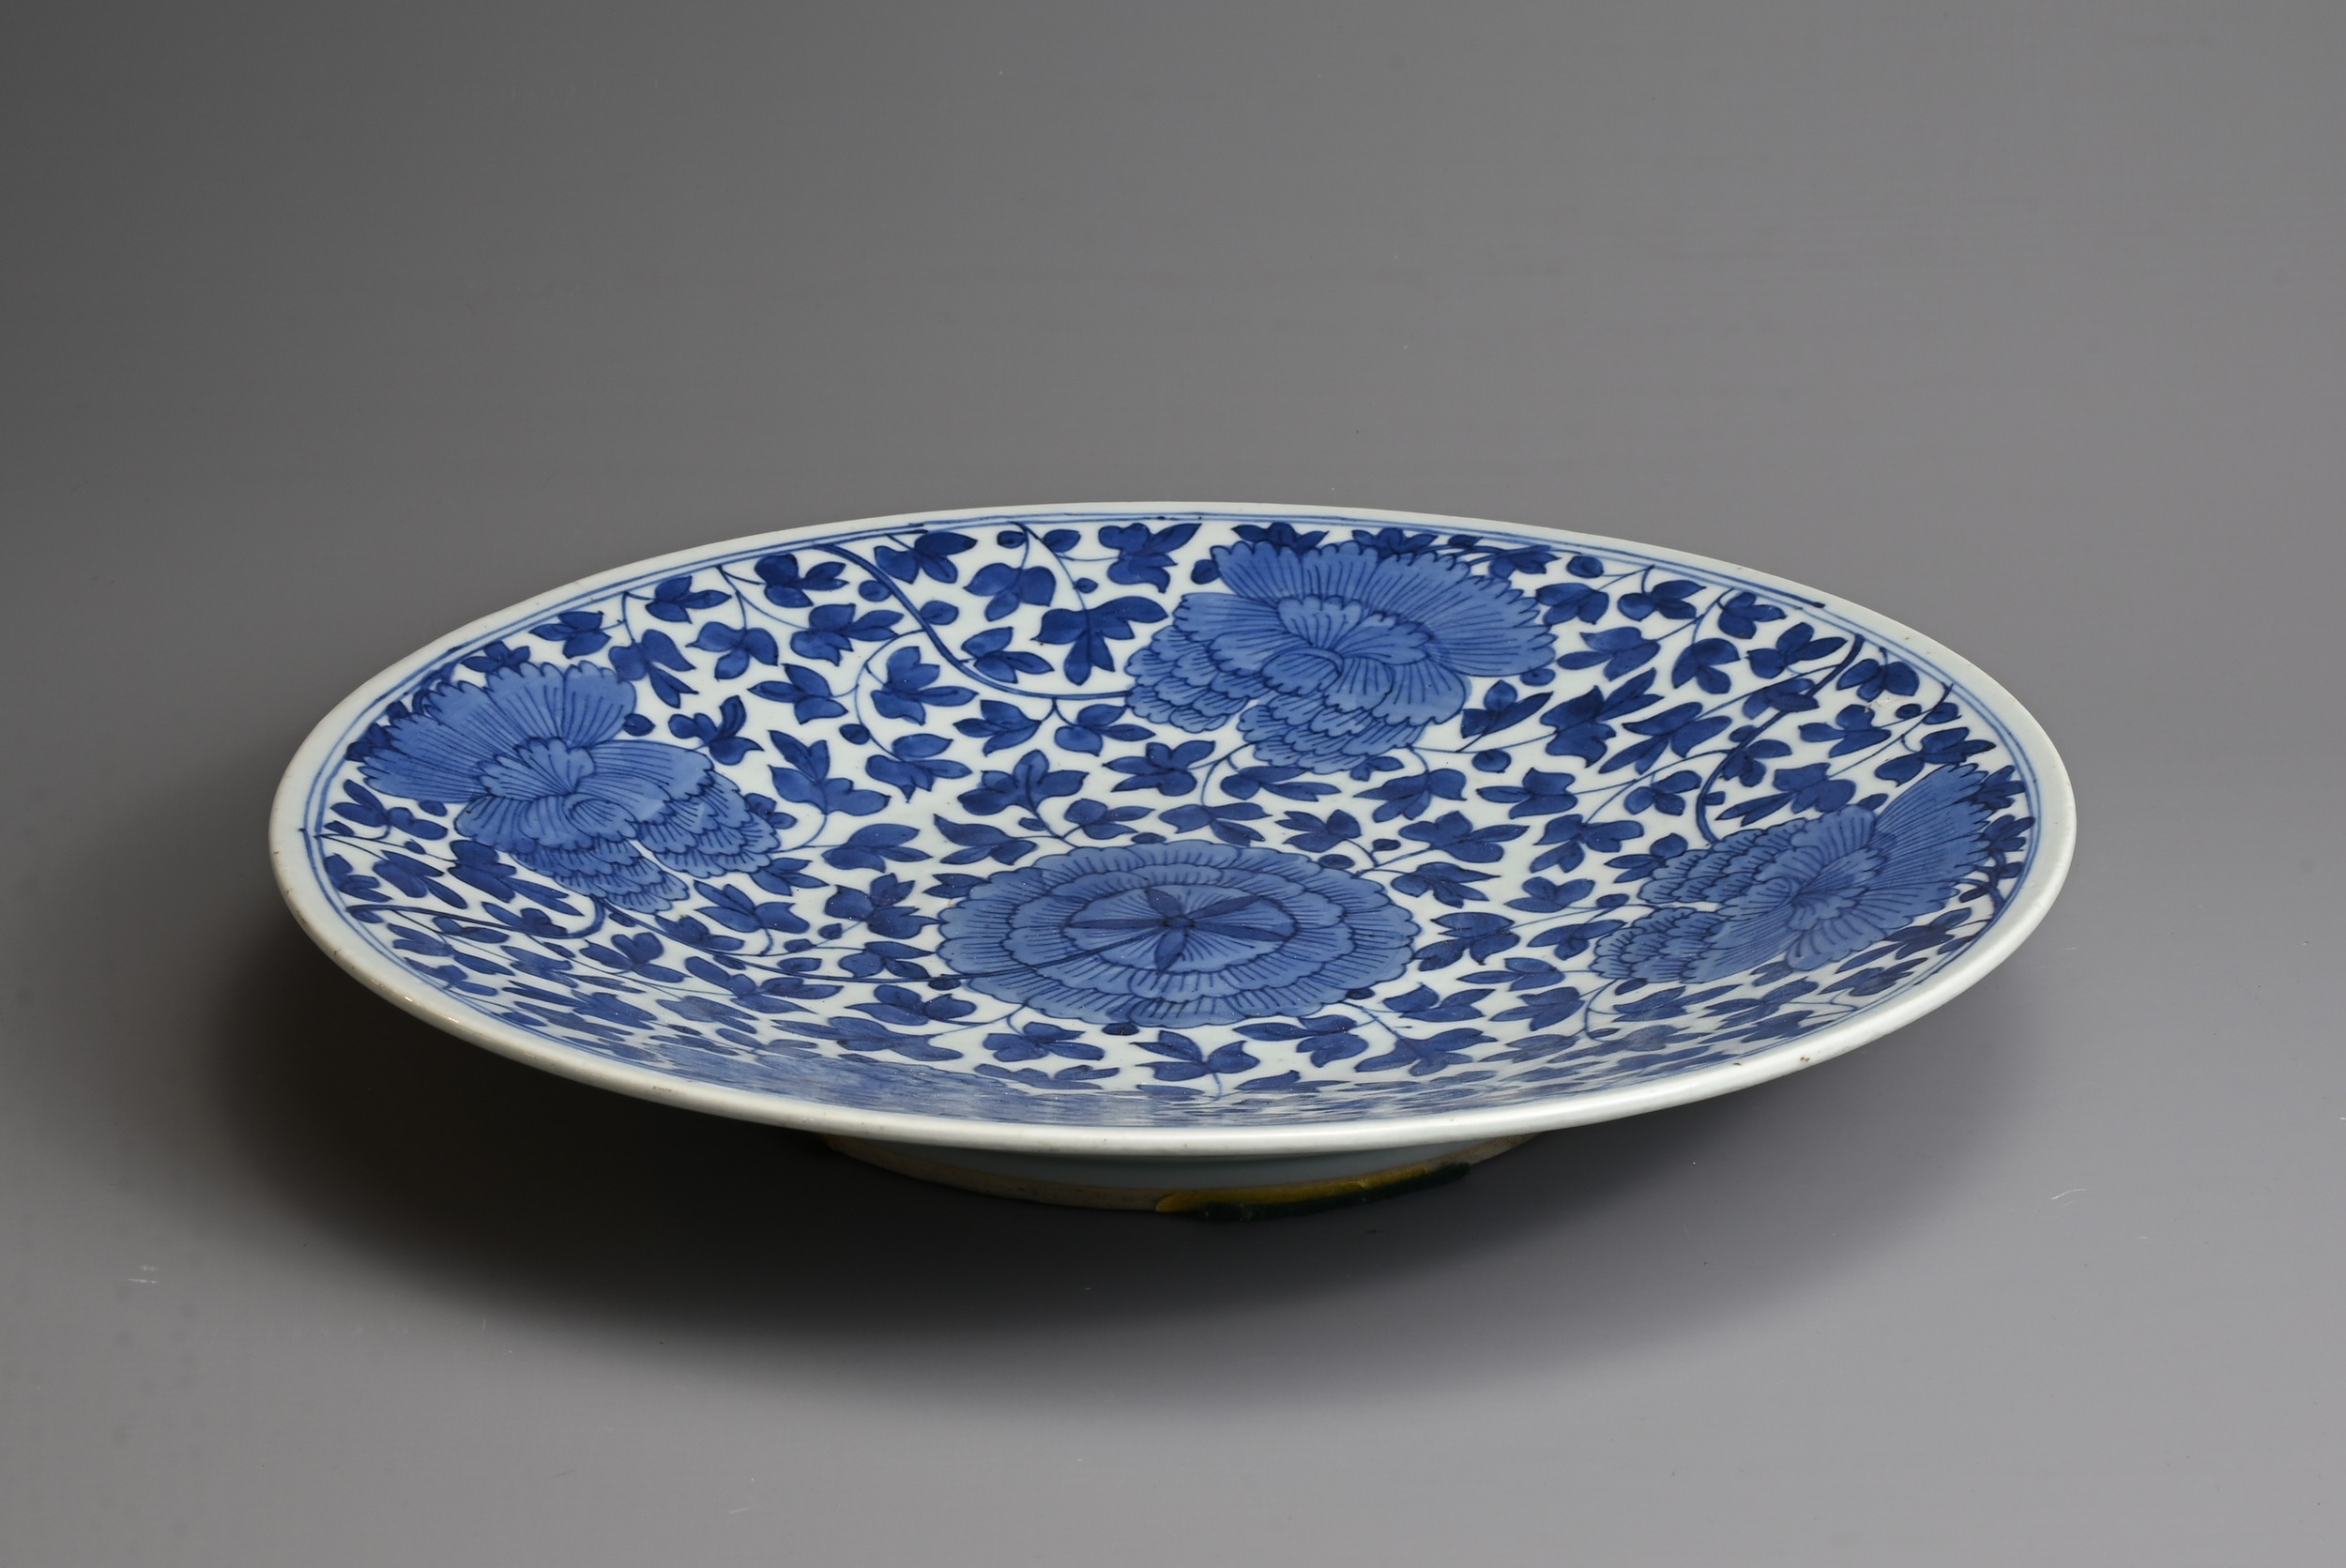 A LARGE CHINESE BLUE AND WHITE PORCELAIN DISH, QING DYNASTY. Decorated with large peony blooms - Image 8 of 8